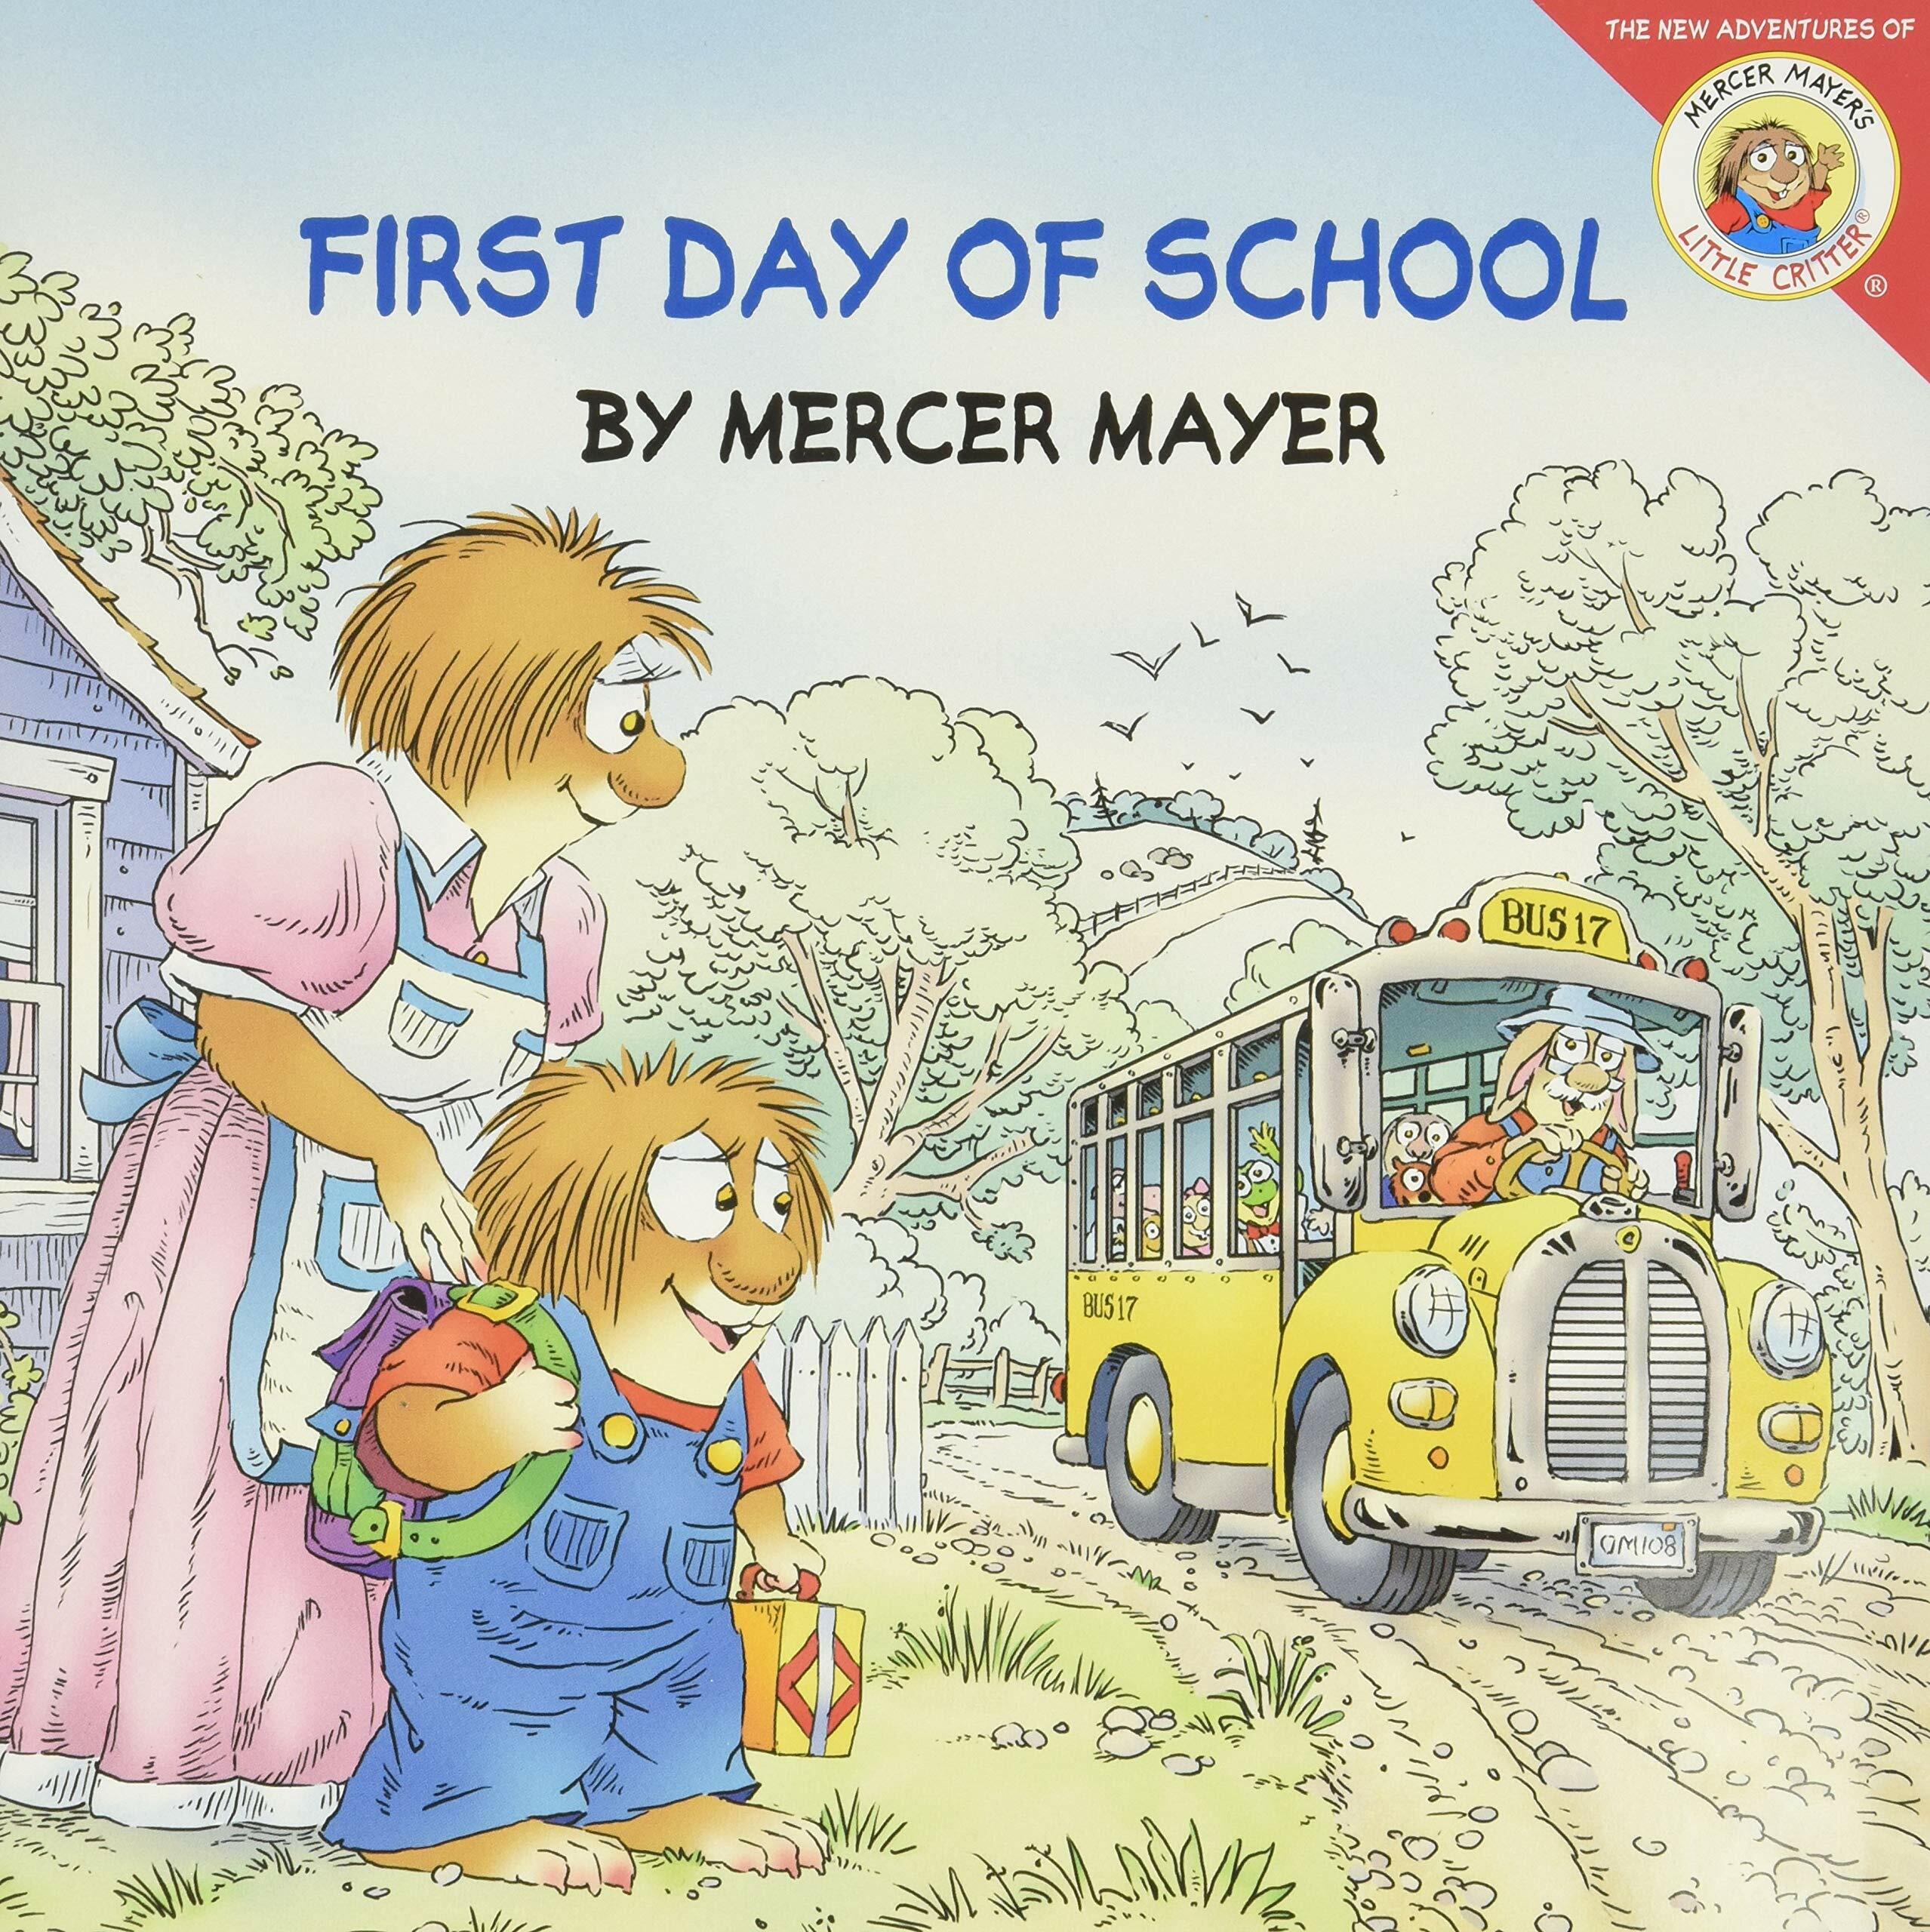 Little Critter: First Day of School (Paperback)